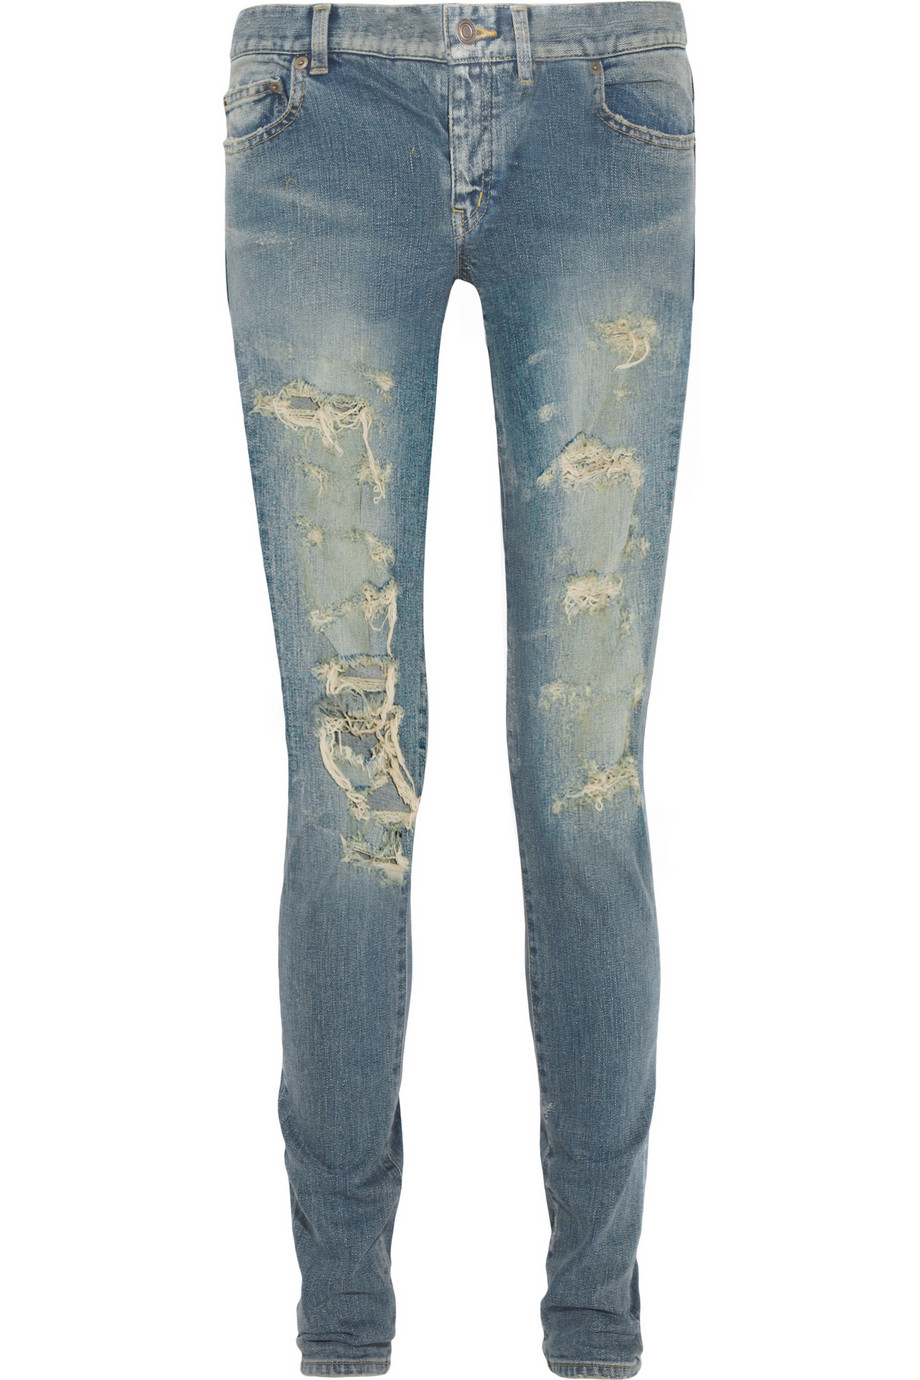 Saint Laurent Distressed Low-Rise Skinny Jeans in Blue | Lyst